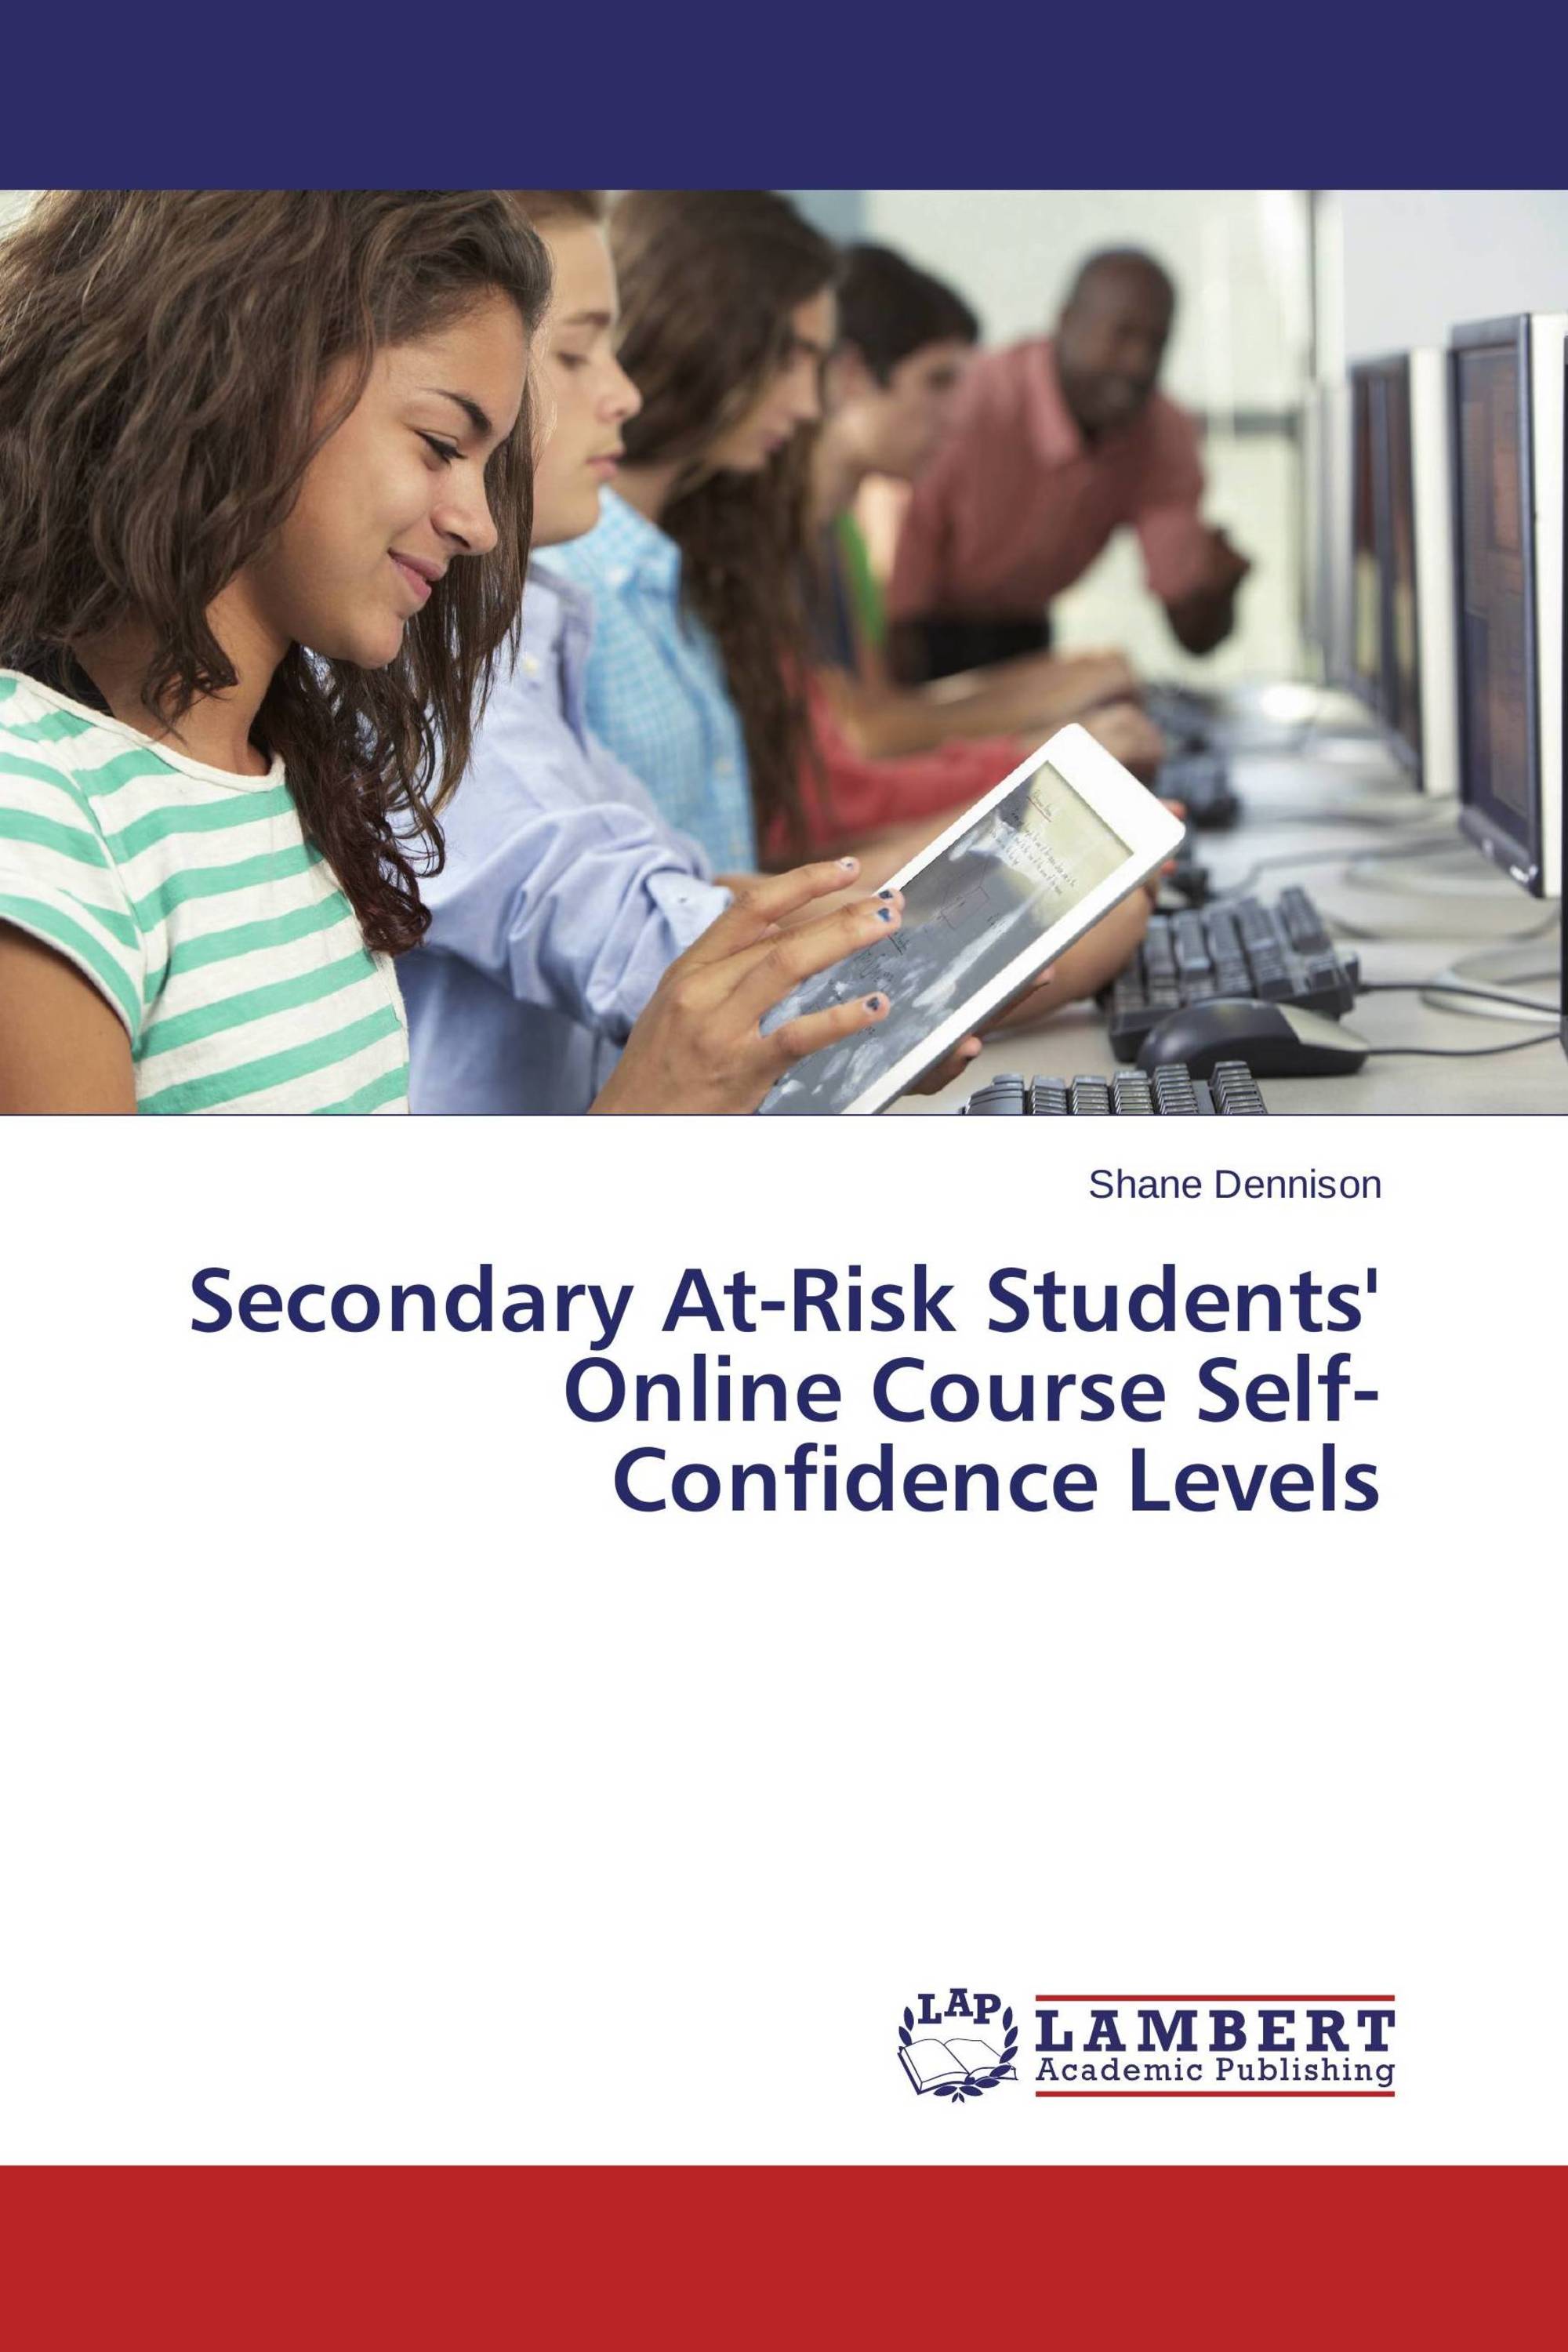 Secondary At-Risk Students' Online Course Self-Confidence Levels